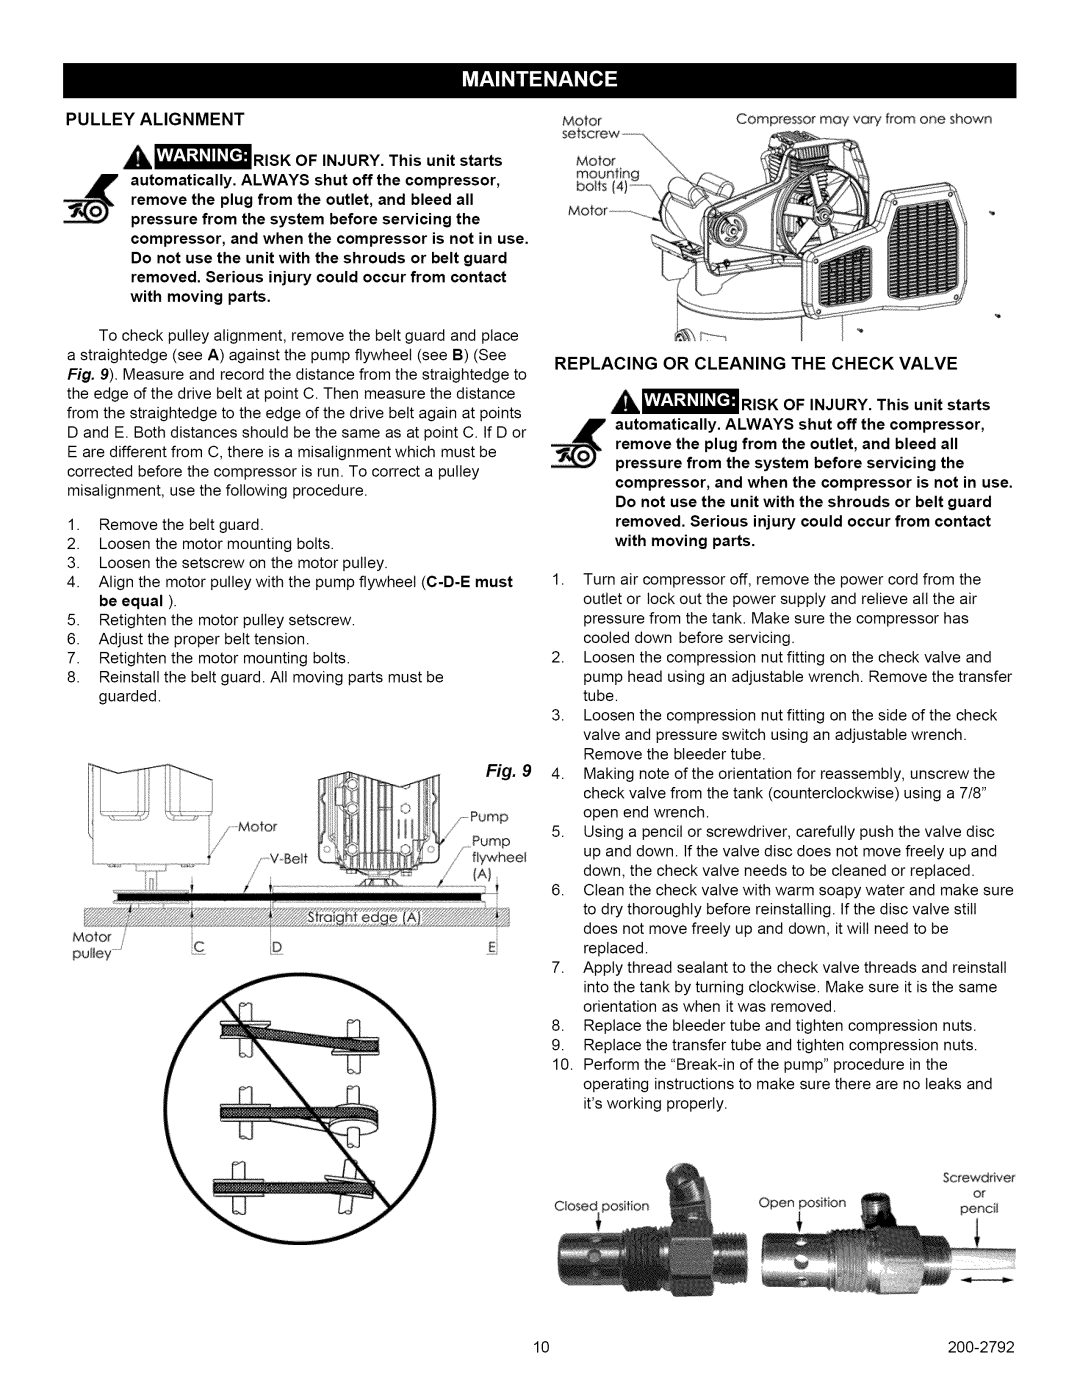 Craftsman 921.16474, 921.16475 owner manual Pulley Alignment, Replacing Or Cleaning The Check Valve 